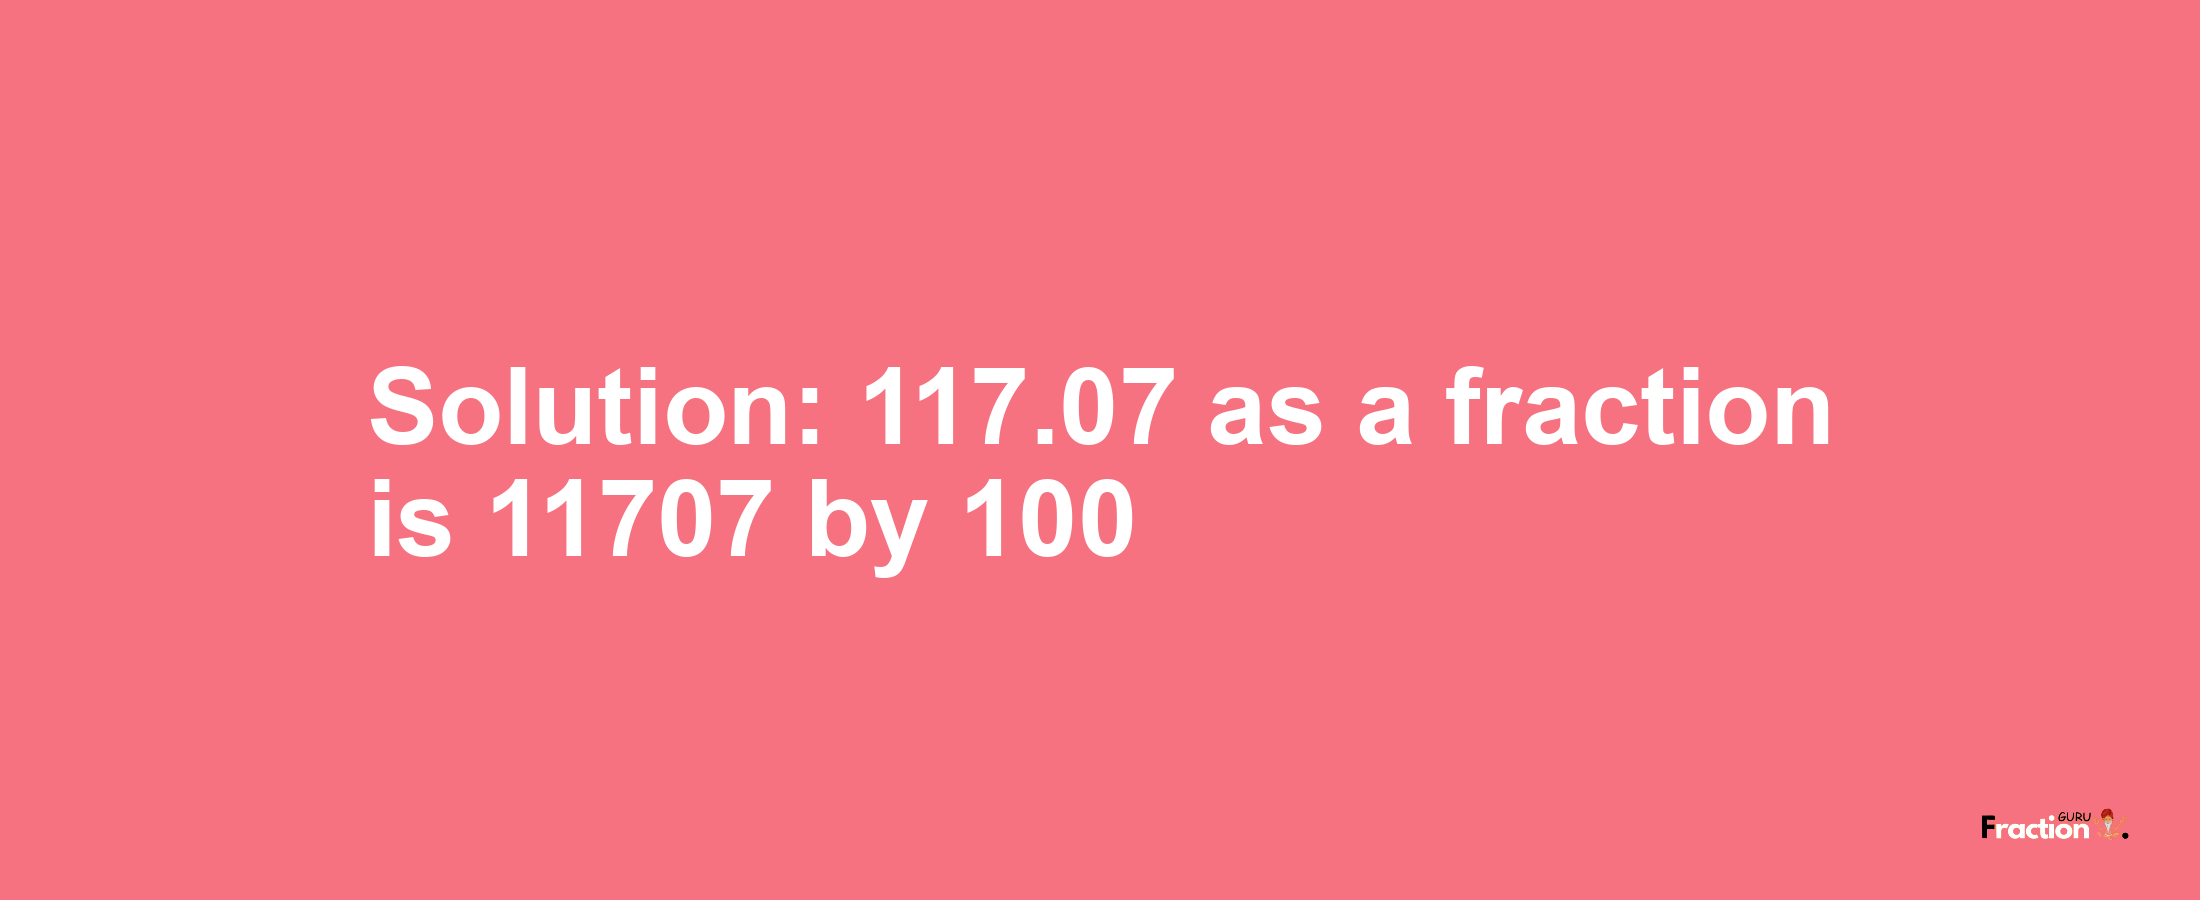 Solution:117.07 as a fraction is 11707/100